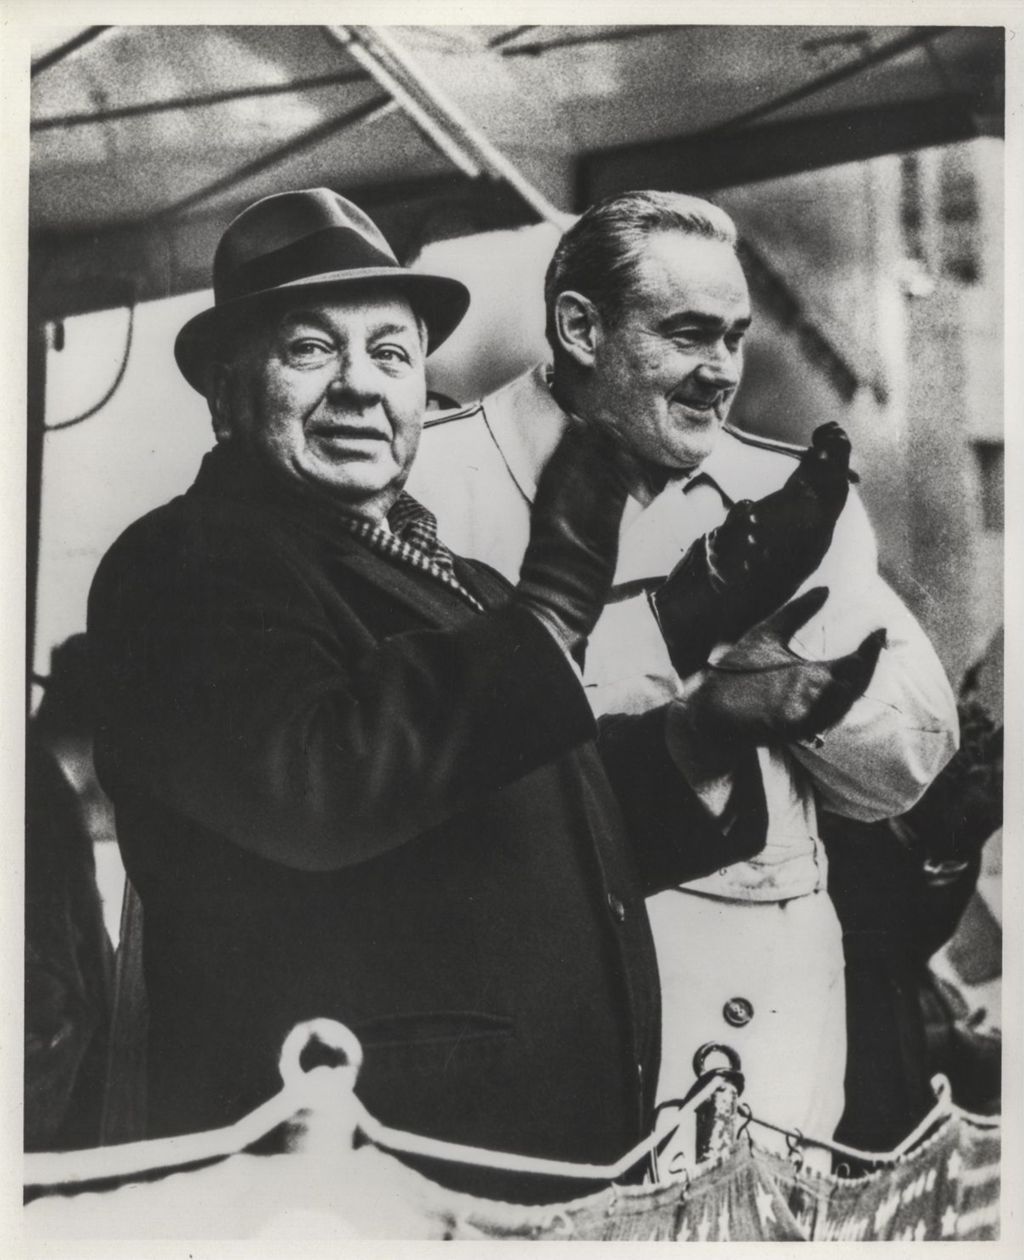 Miniature of Richard J. Daley with George Dunne